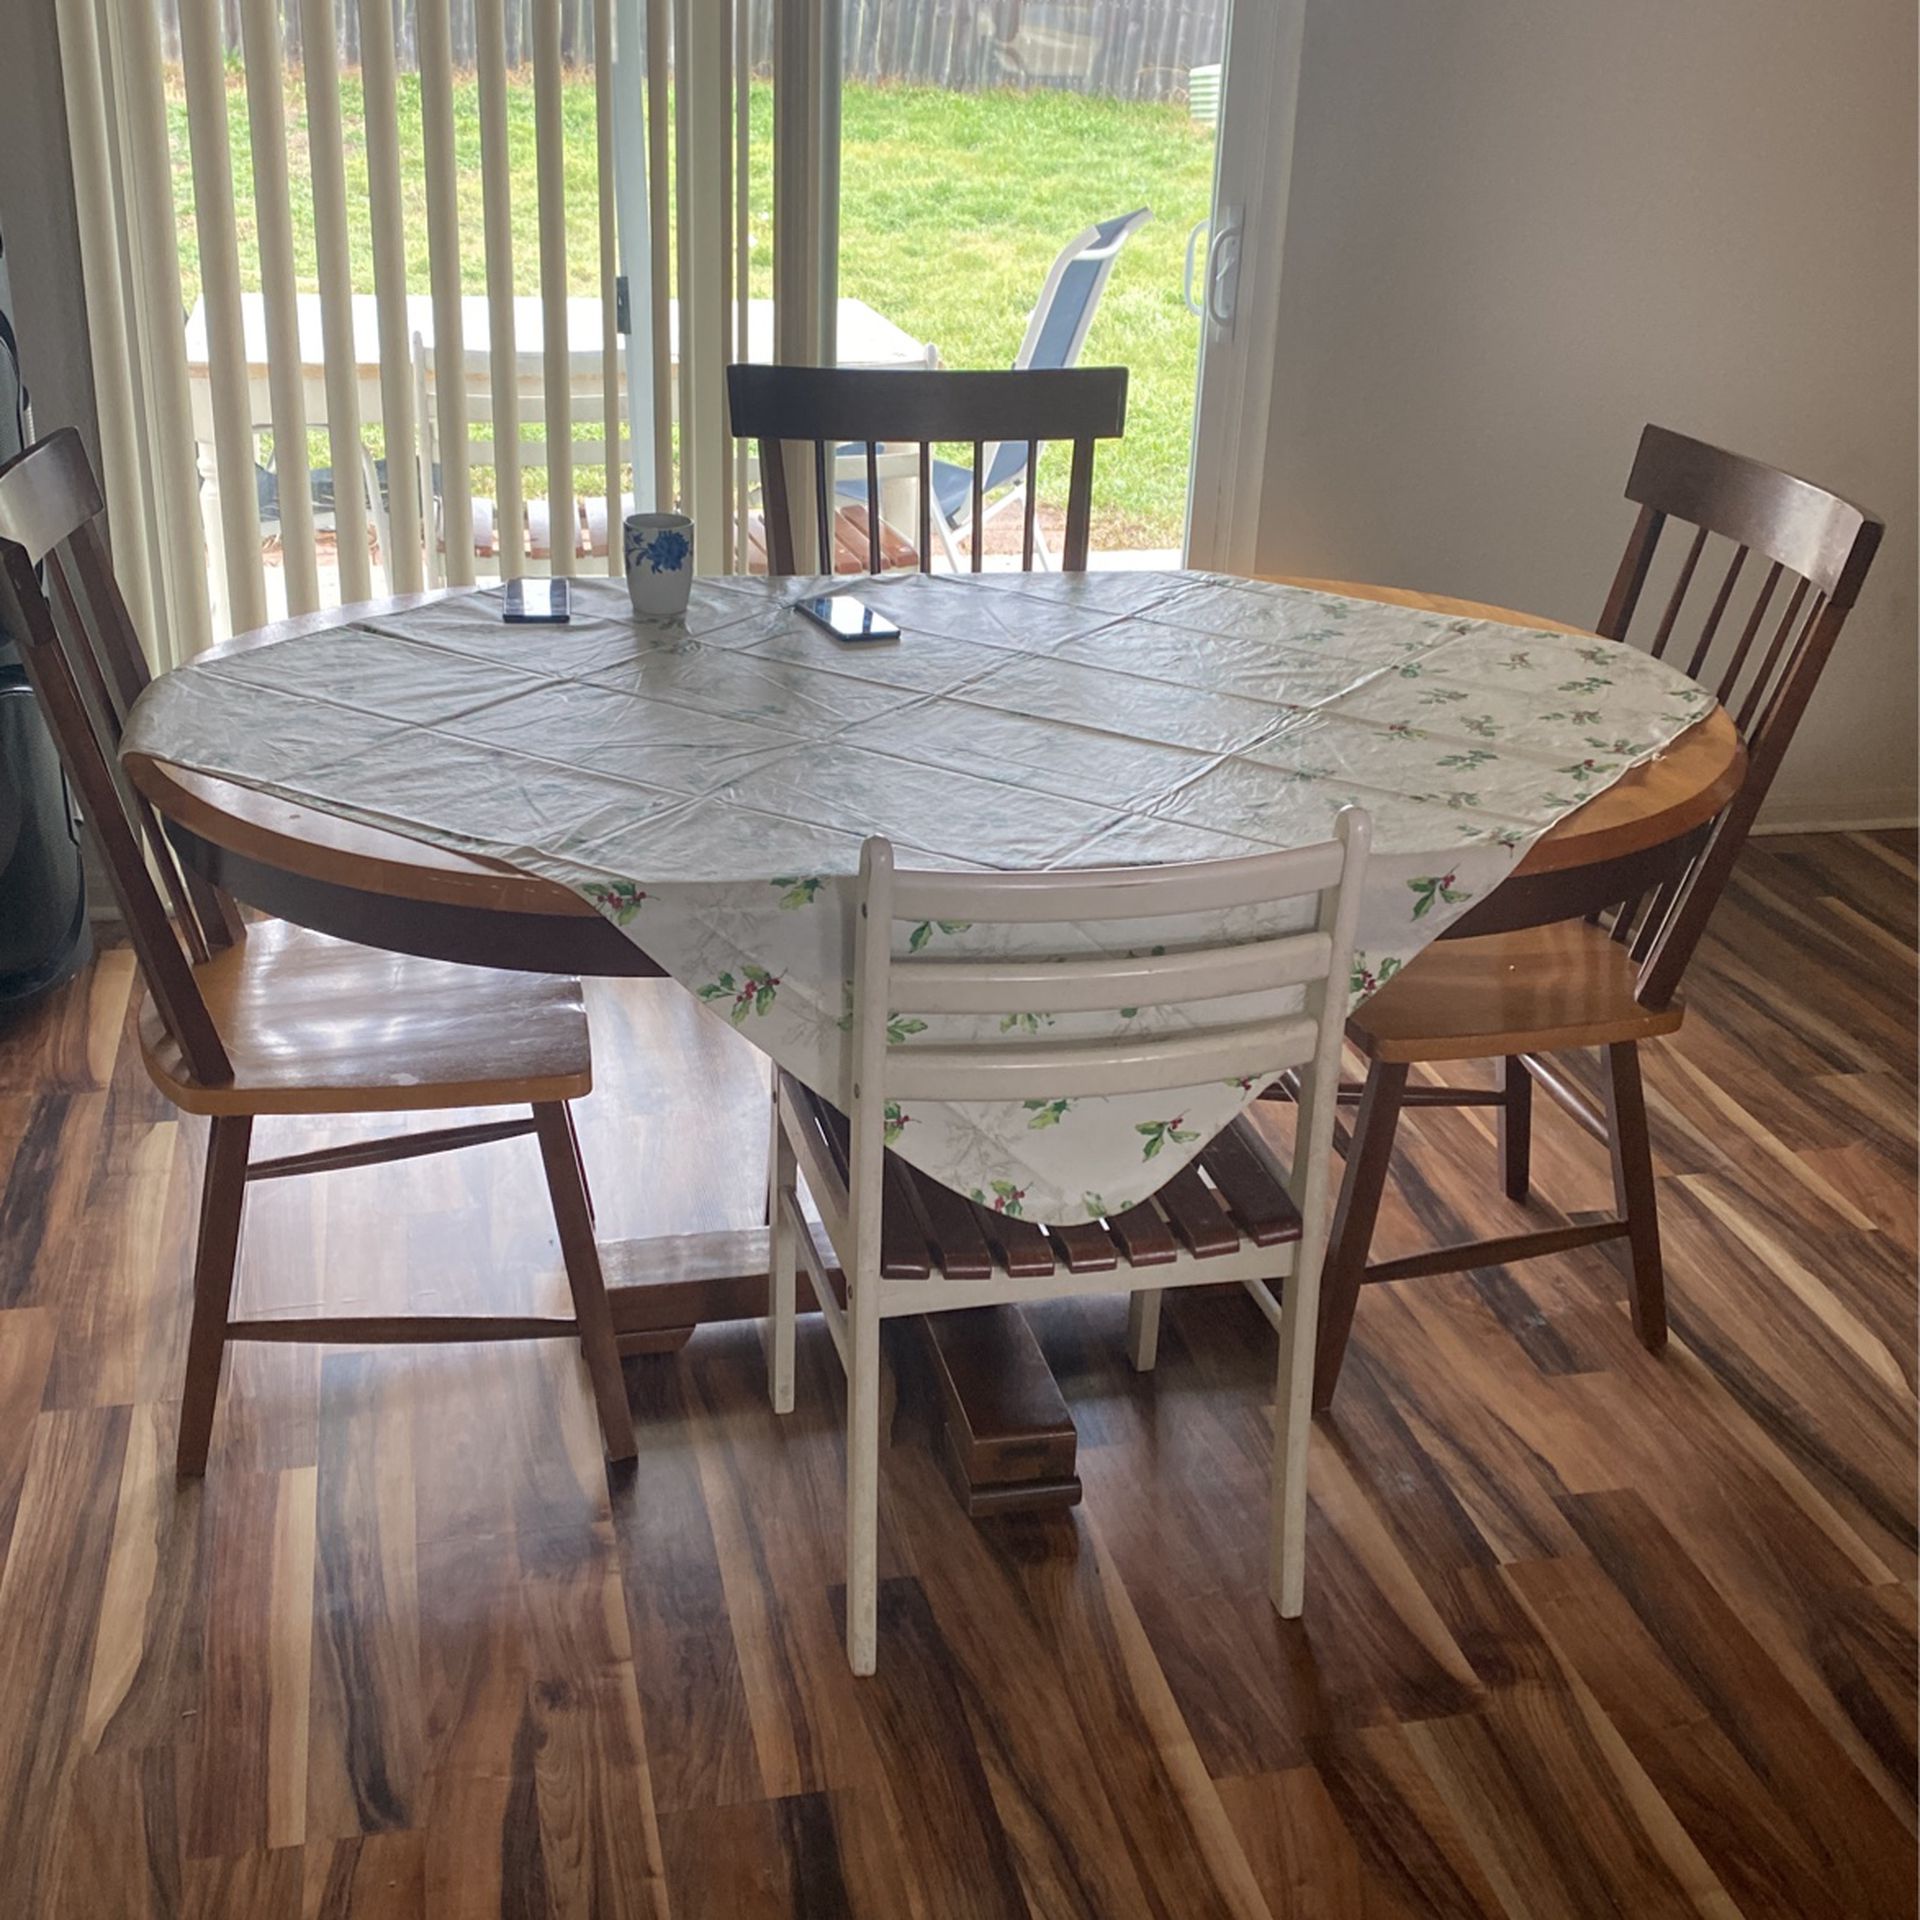 Kitchen Table With Four Chairs